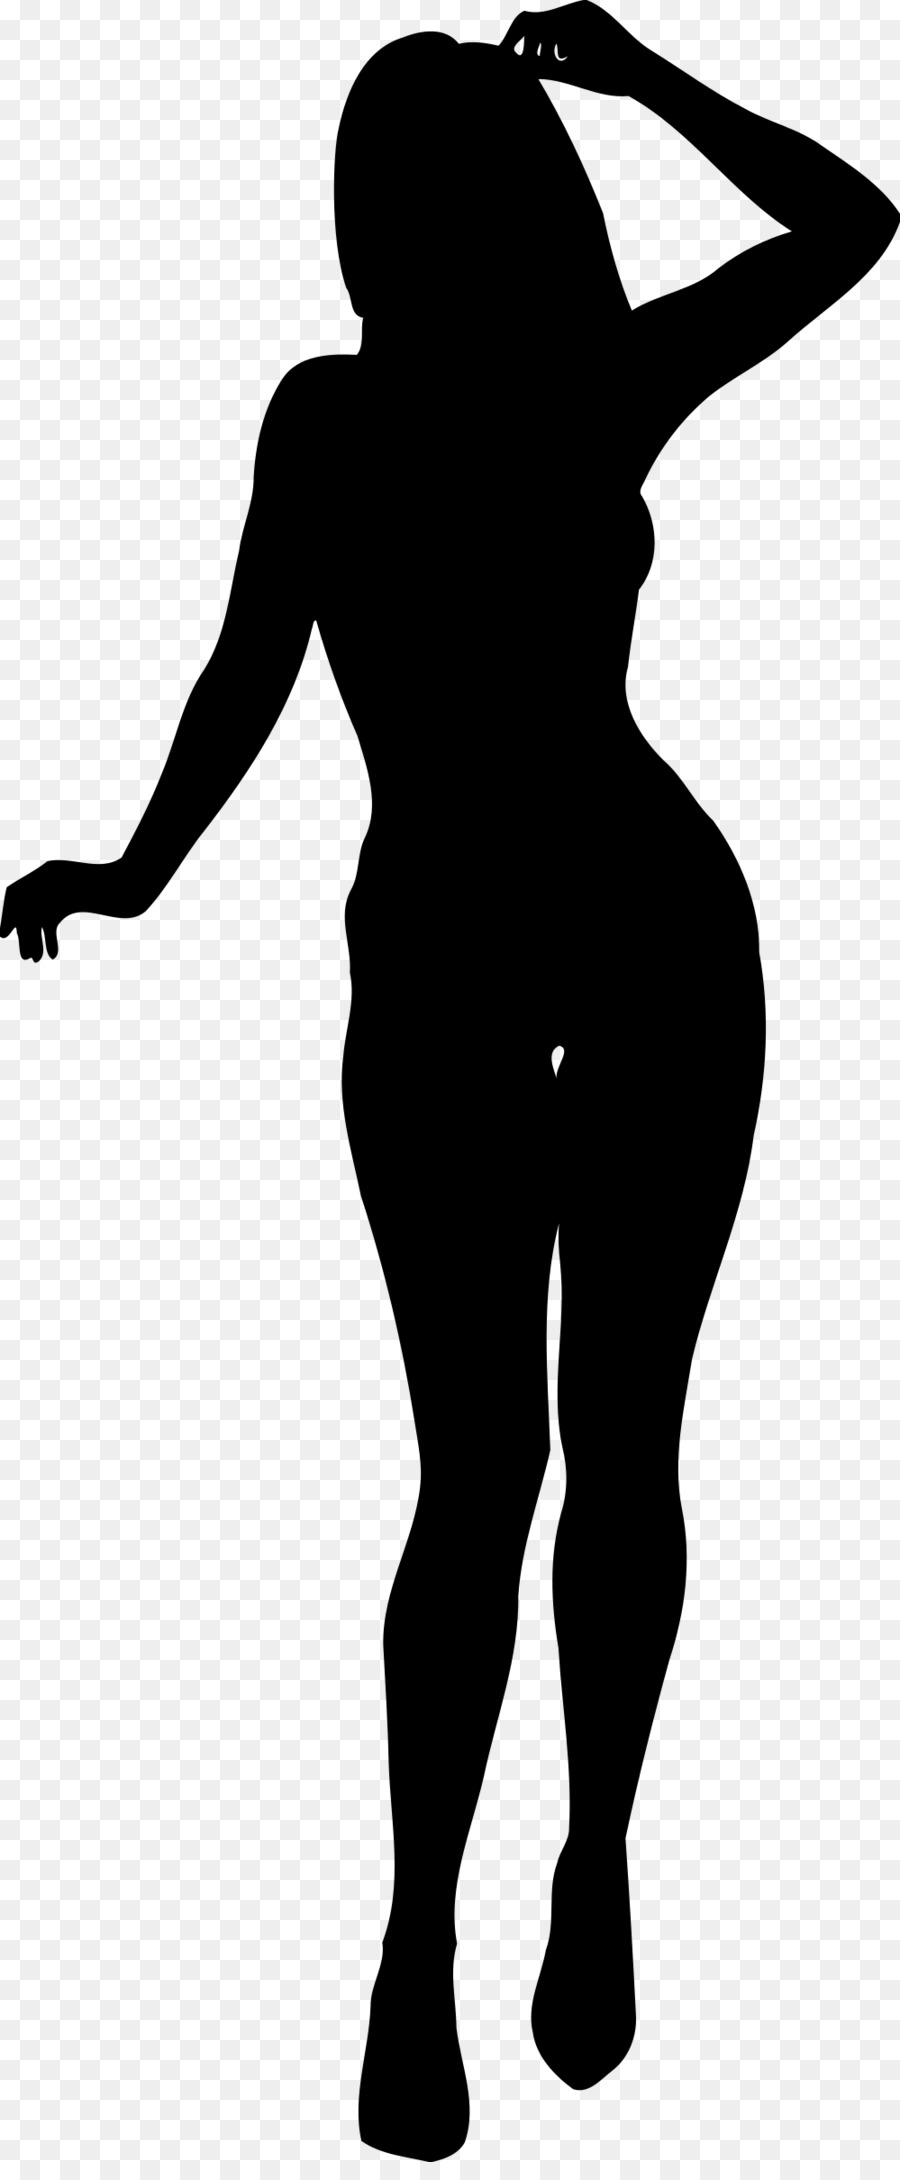 Silhouette Rathgar Clip art - woman silhouette png download - 999*2400 - Free Transparent Silhouette png Download.